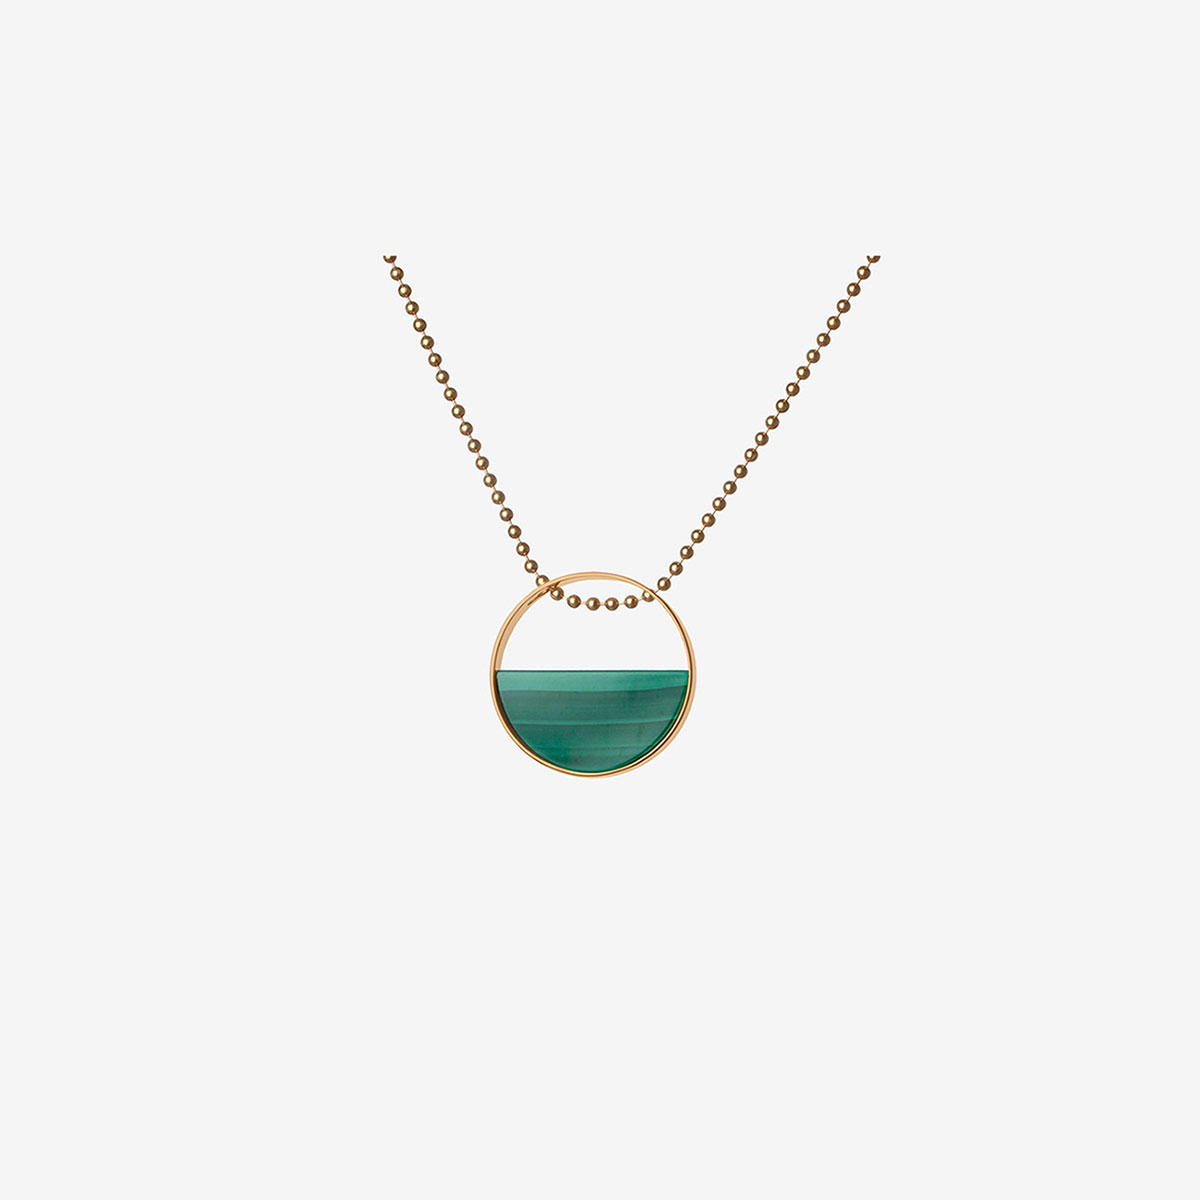 Ula handmade necklace in 9k or 18k gold, sterling silver and malachite designed by Belen Bajo